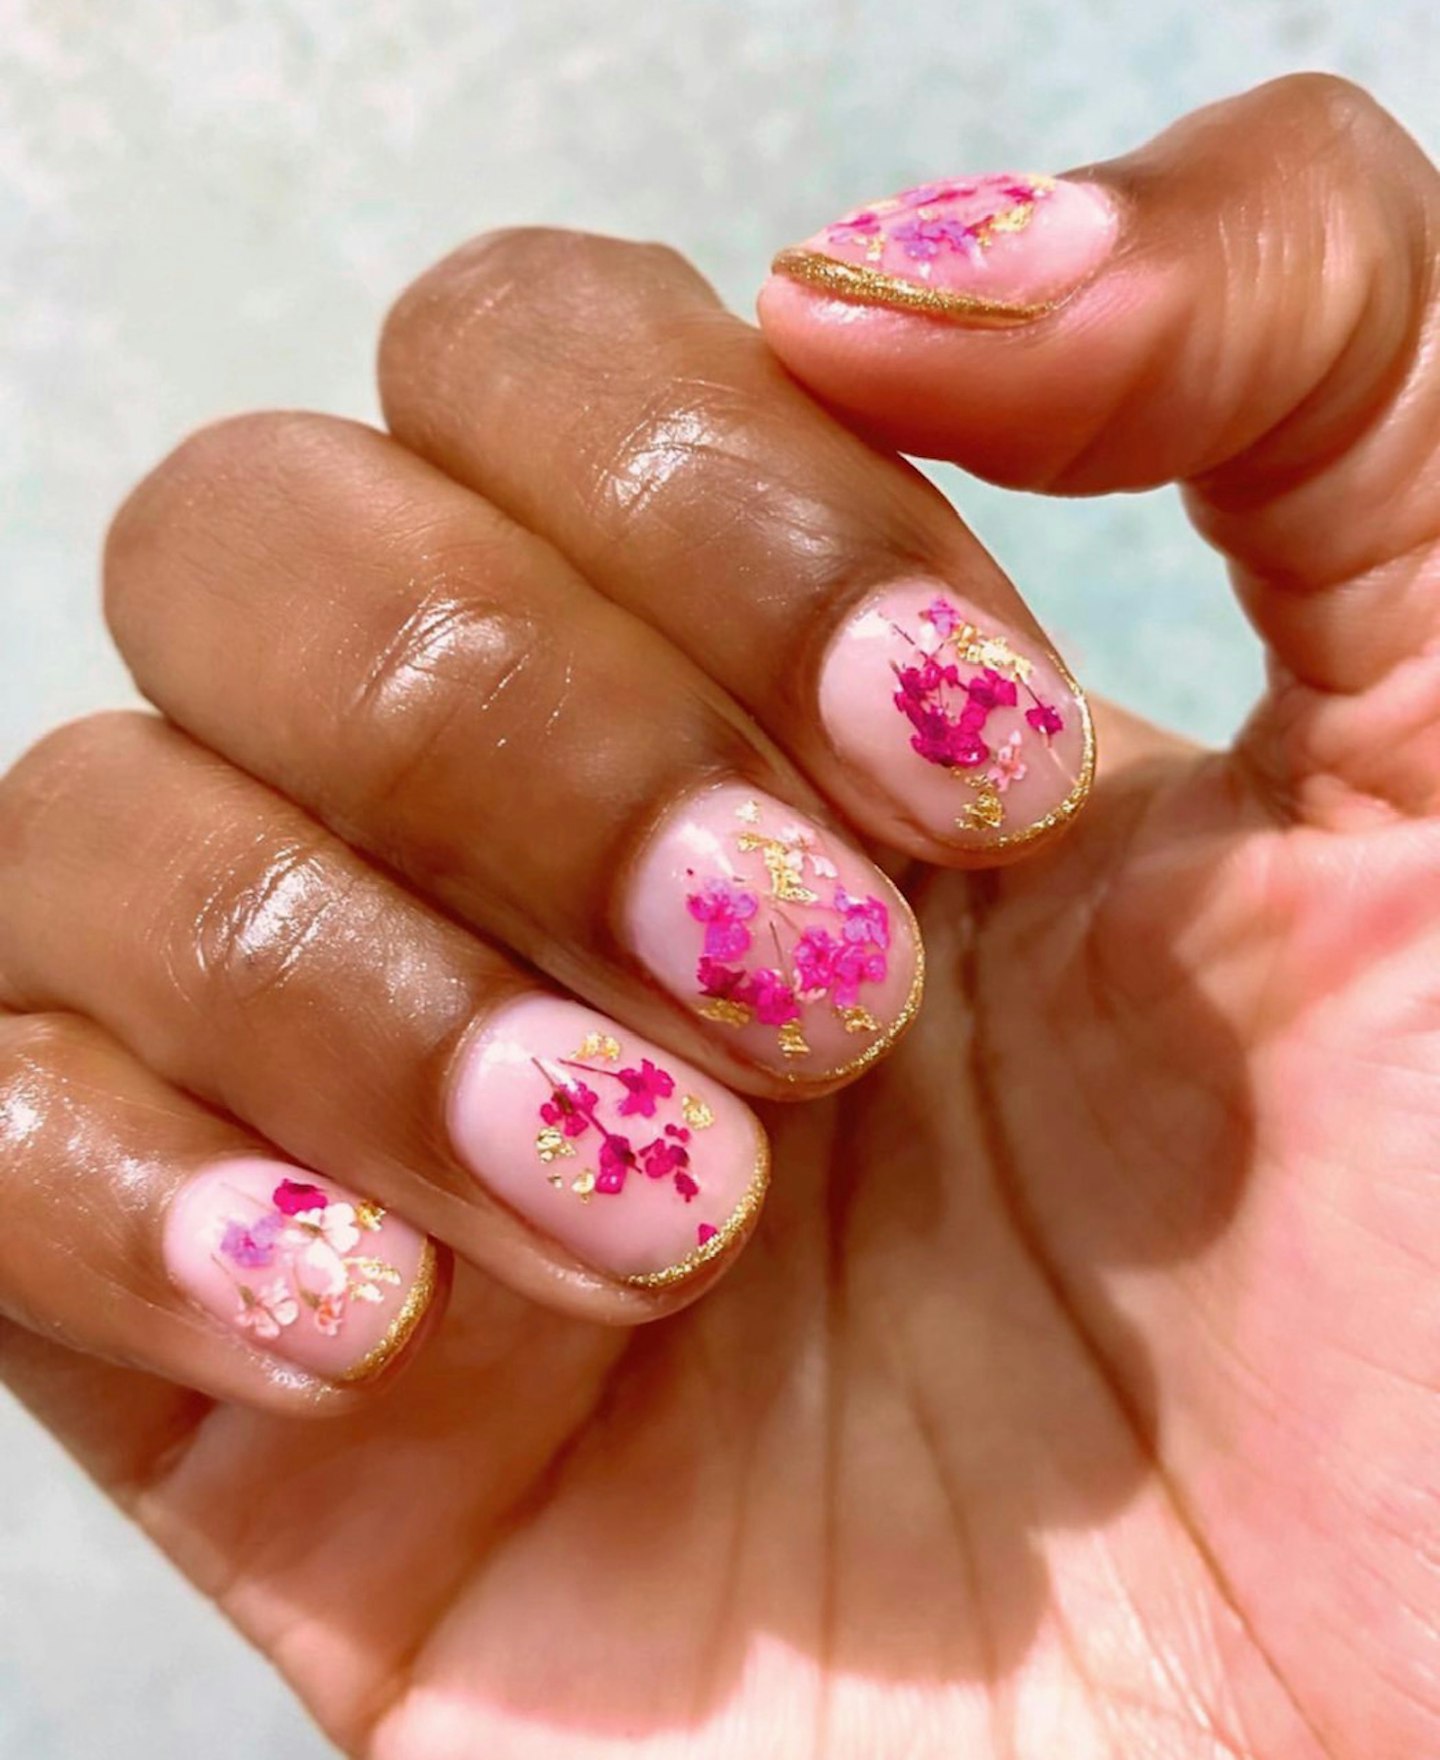 Dried Flower Nails Are the Trend For People Who Just Can't Quit